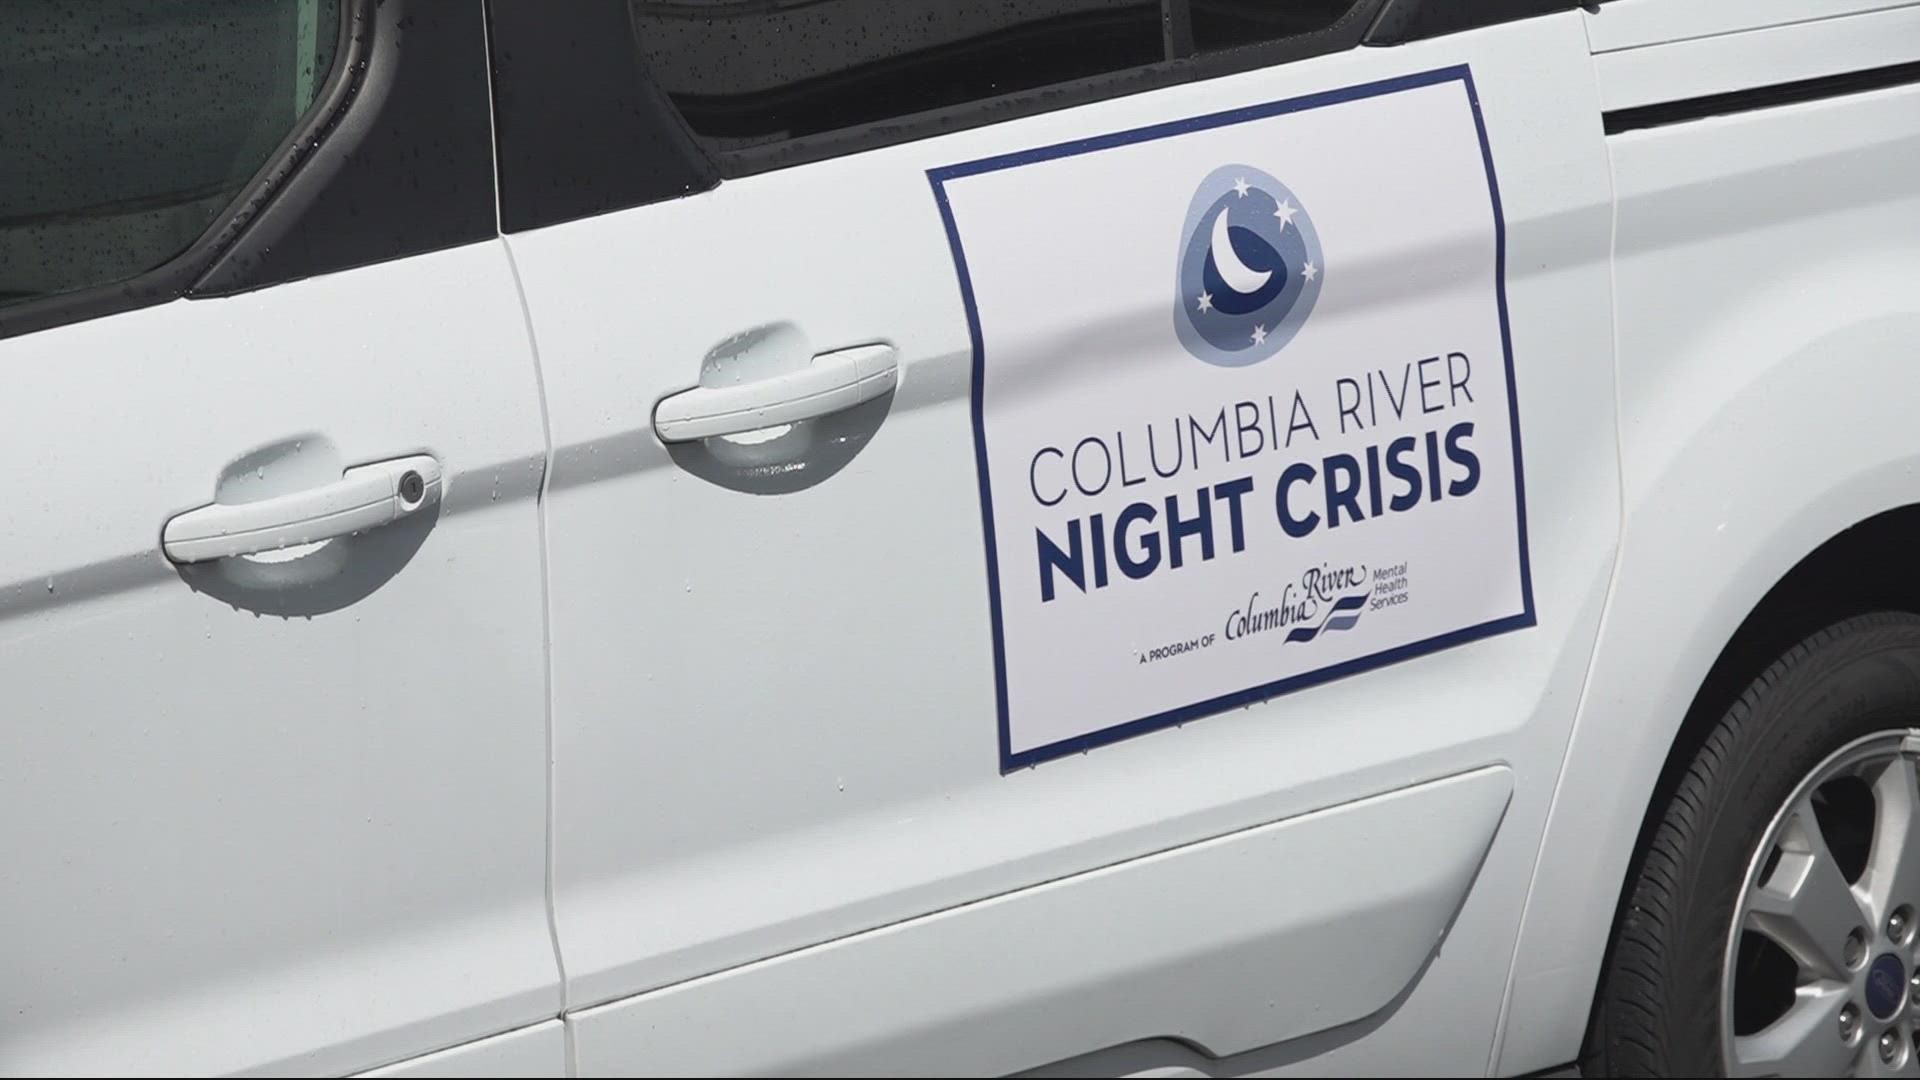 Clark County's new night crisis team launched earlier this week. The team is focused on responding to non-violent mental health calls.